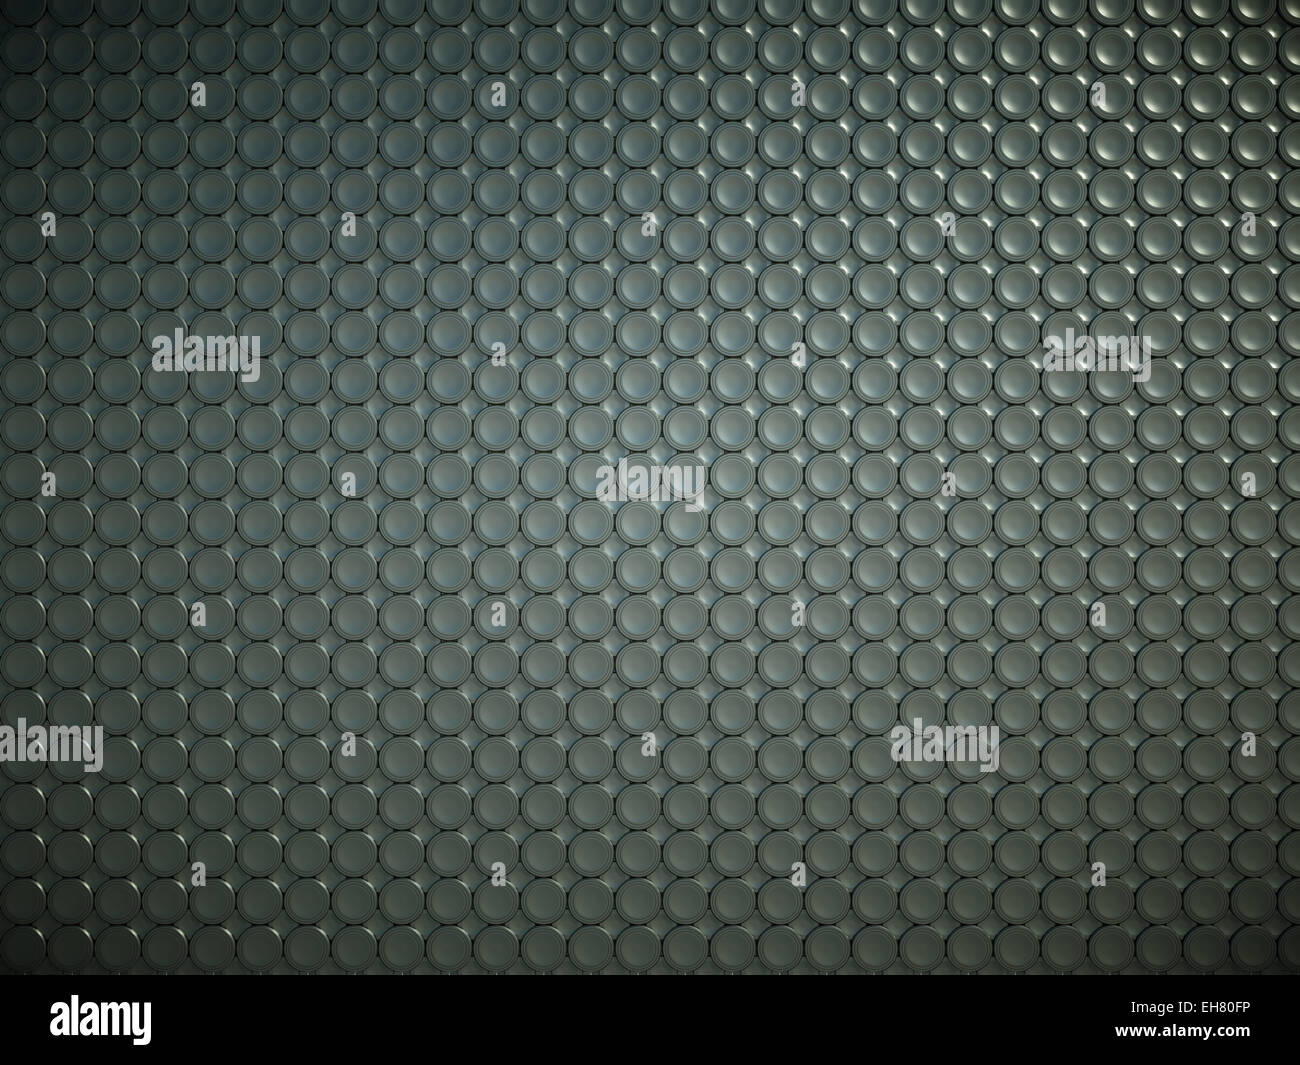 Black bulging circles texture or background. Large resolution Stock Photo